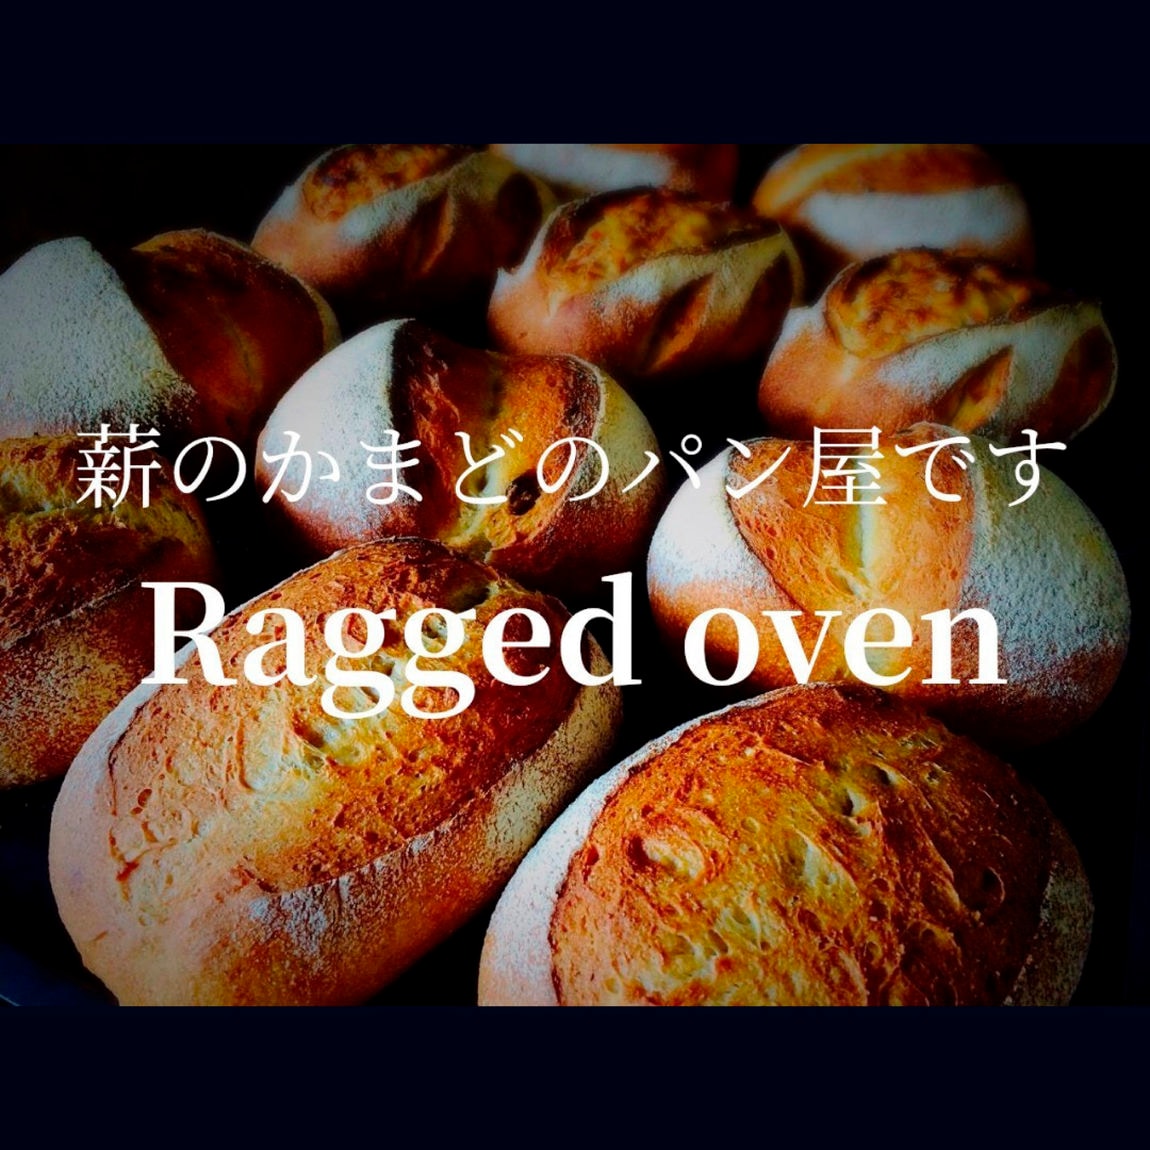 12-Ragged oven